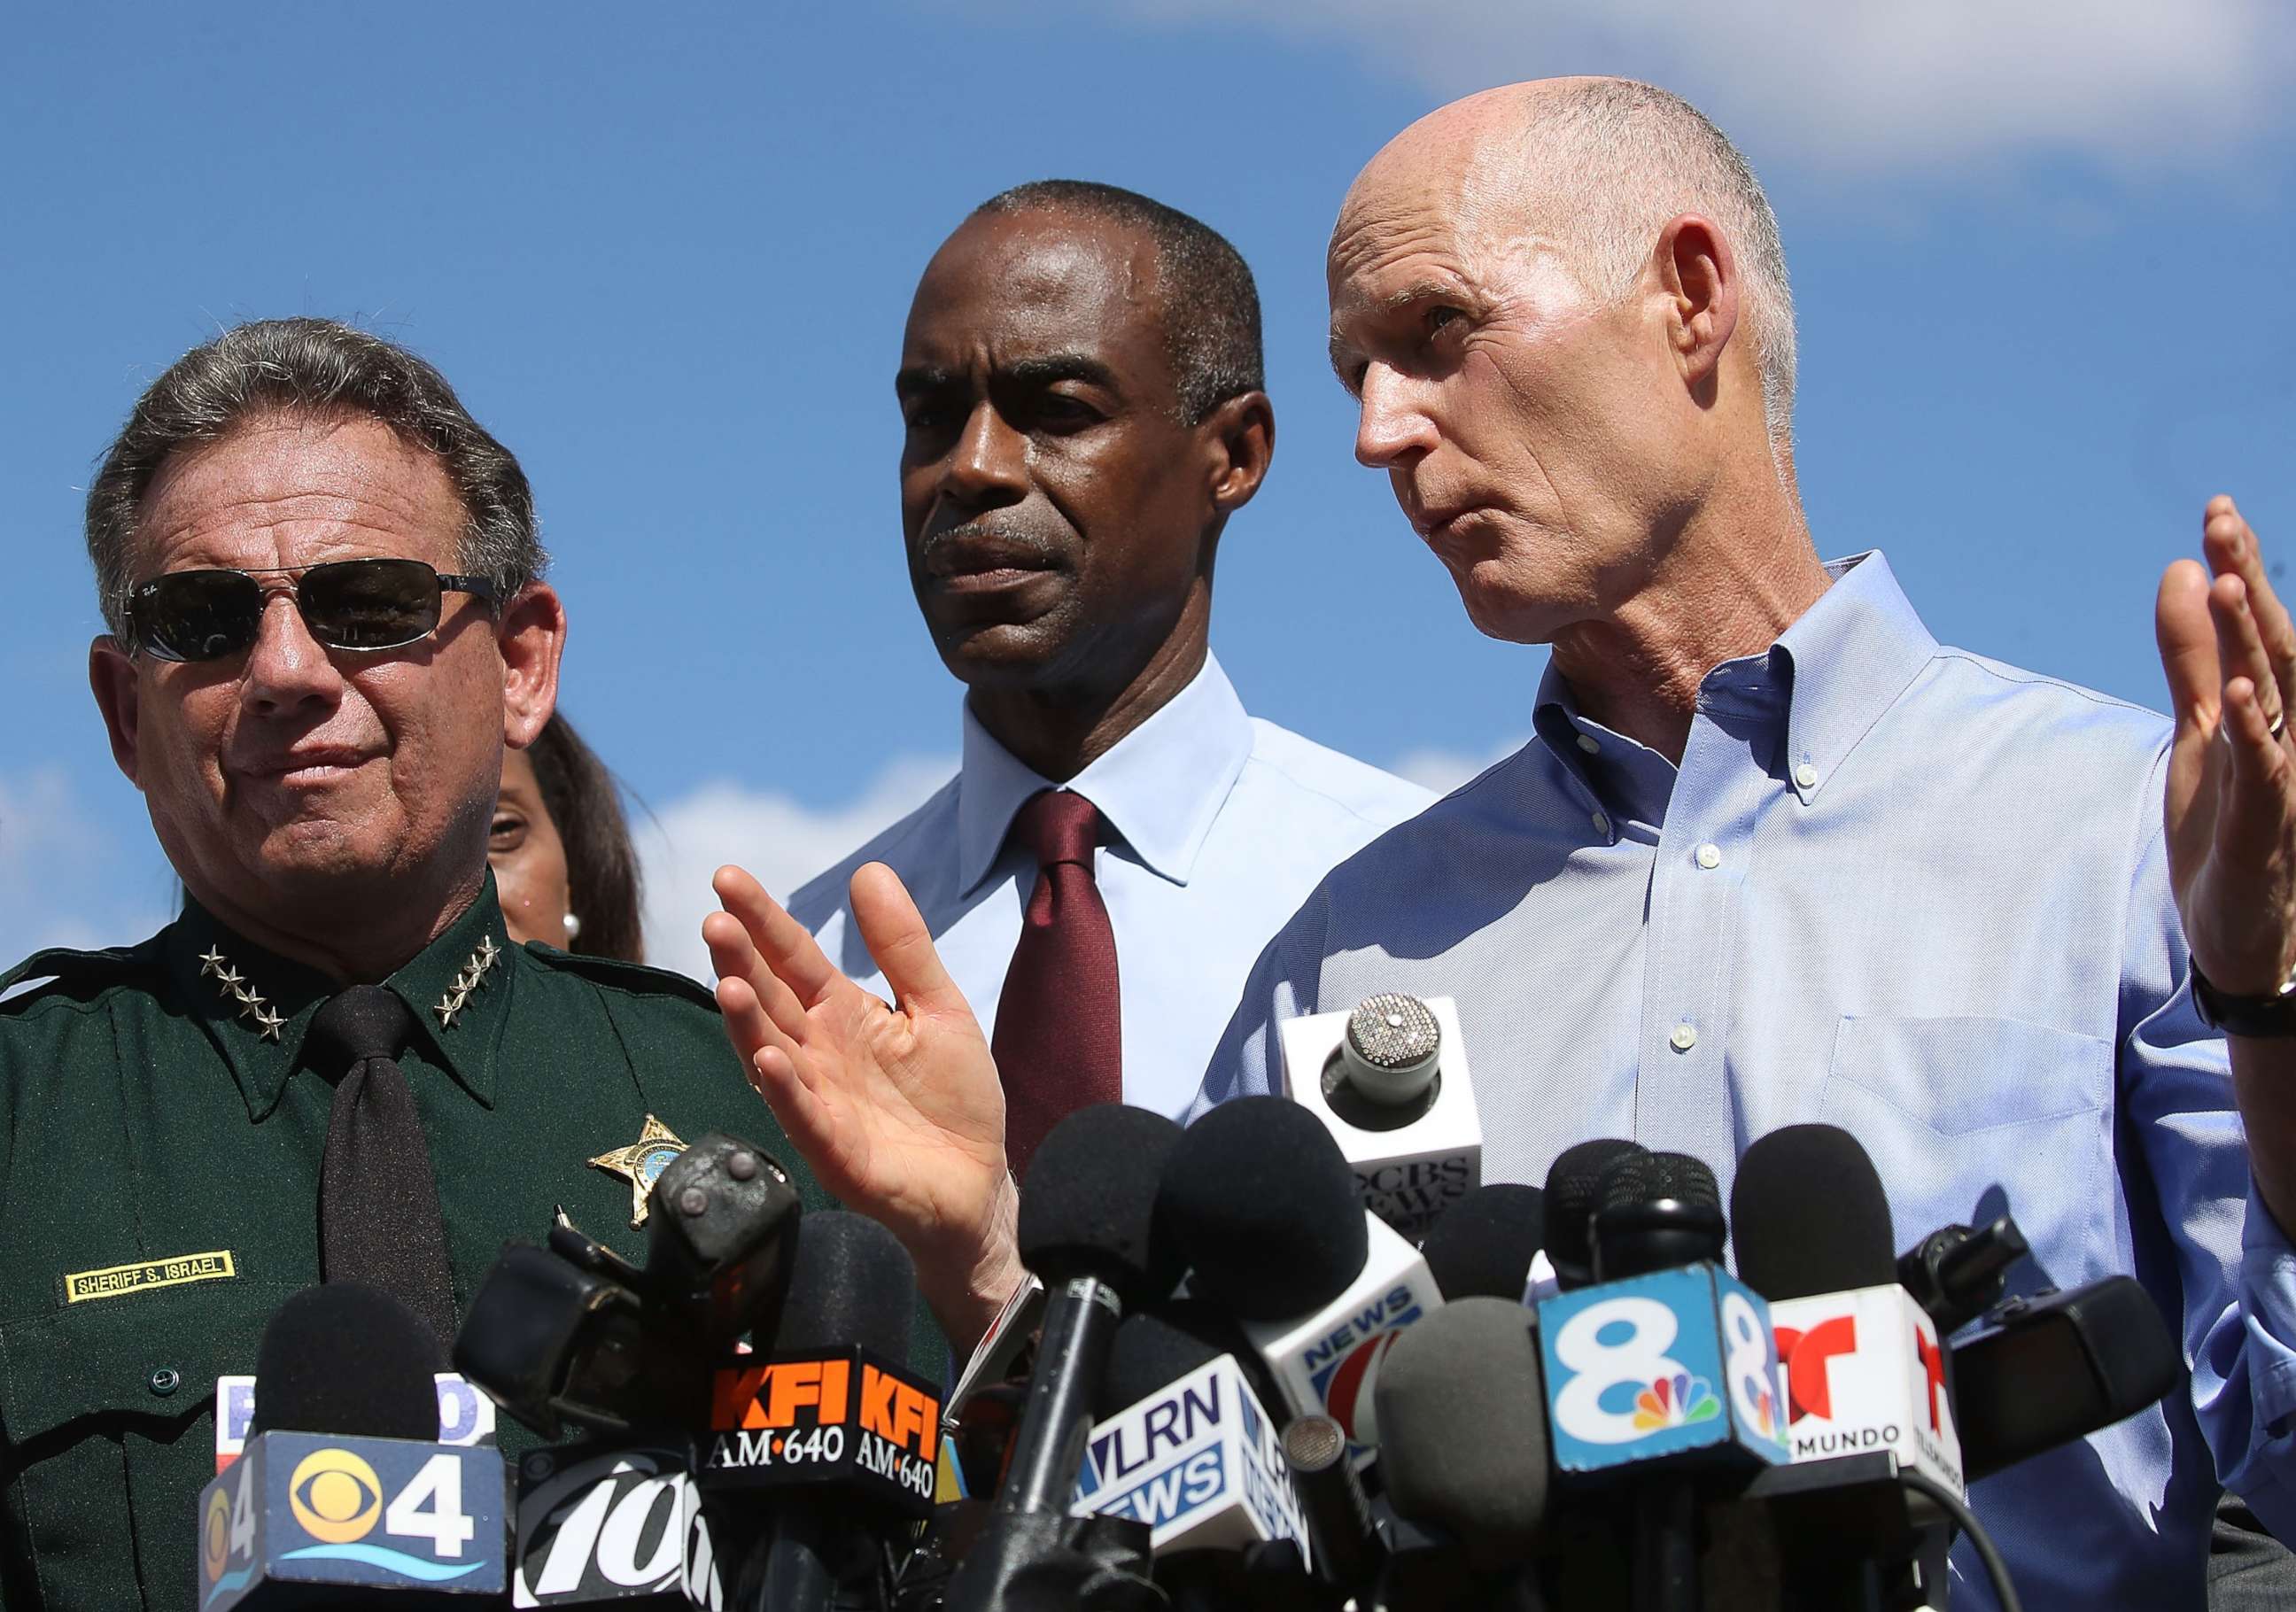 PHOTO: Florida Governor Rick Scott, speaks to the media while Superintendent Robert W. Runcie and Sheriff Scott Israel look on at a press conference about a mass shooting at Marjory Stoneman Douglas High School, Feb. 15, 2018 in Parkland, Fla.